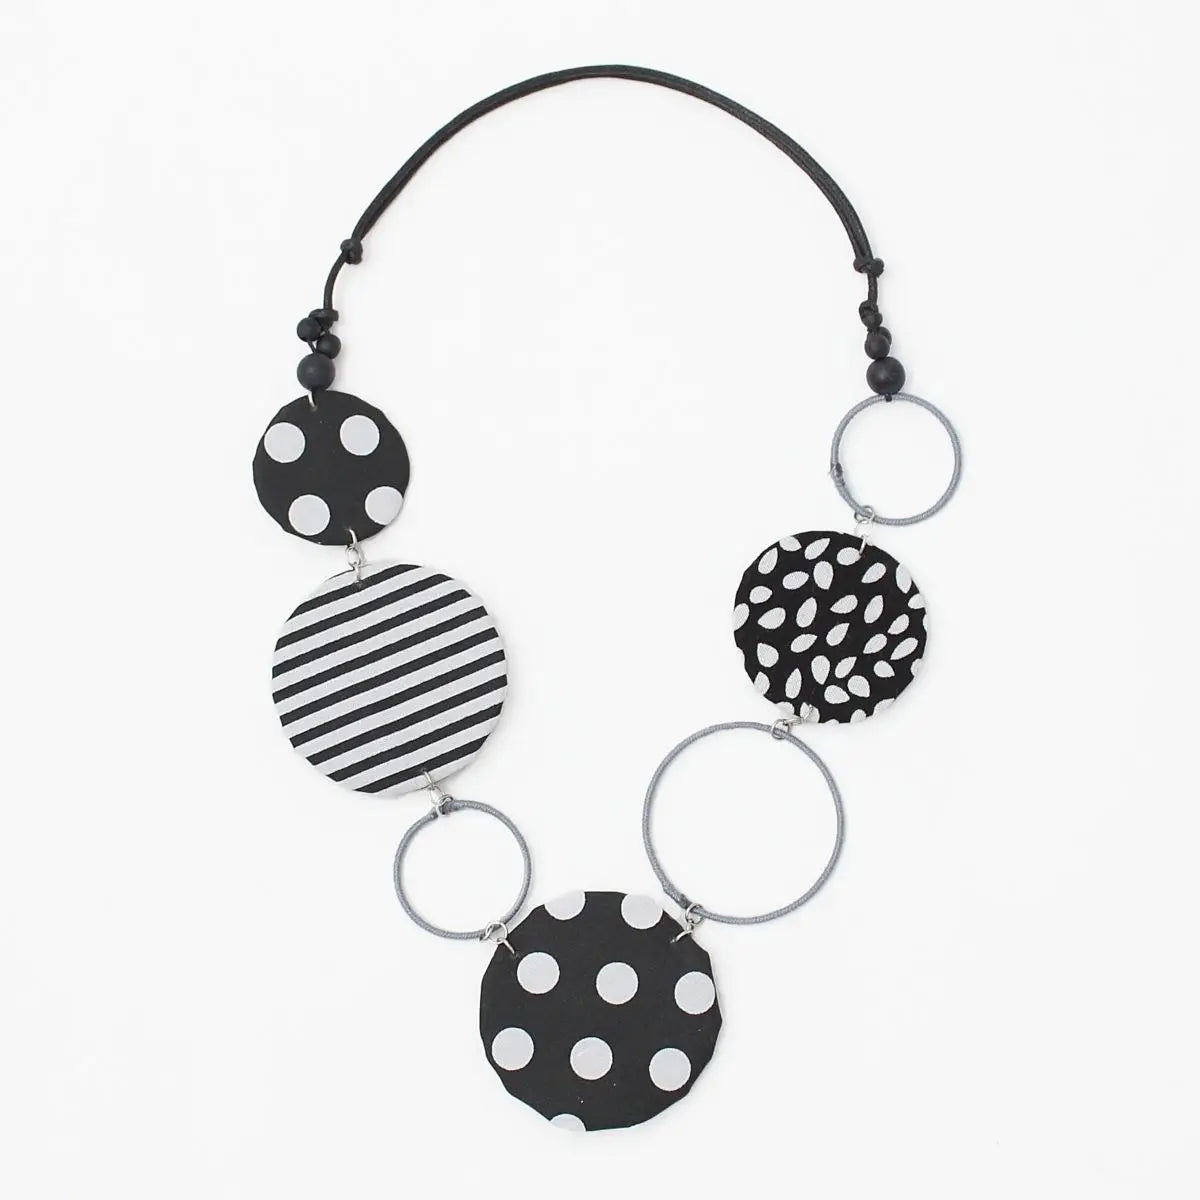 Sylca Black and White Tiegen Necklace